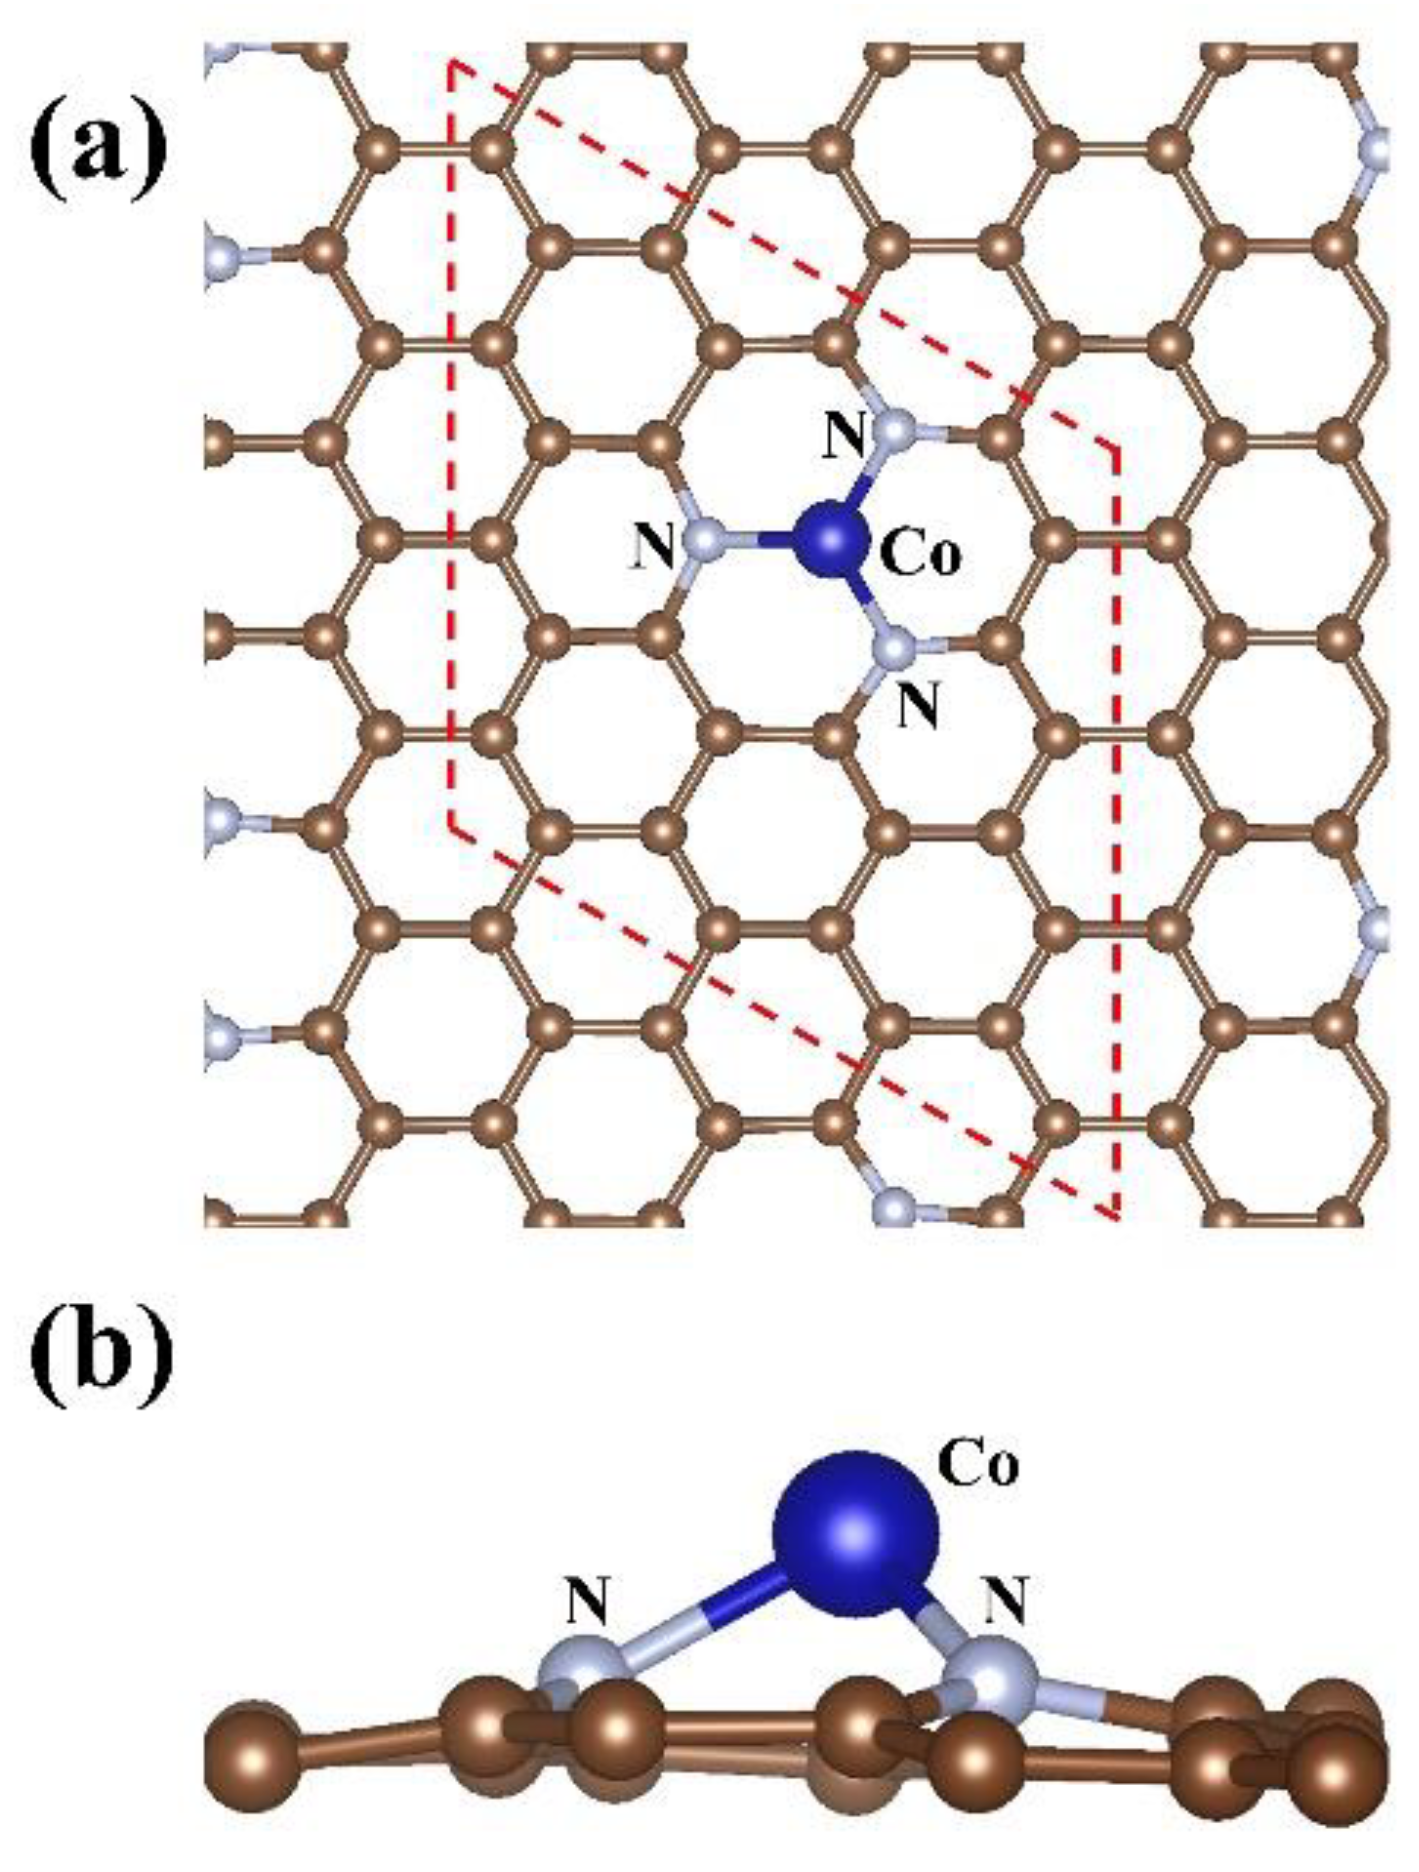 Molecules | Free Full-Text | The Adsorption Behavior of Gas Molecules on  Co/N Co&ndash;Doped Graphene